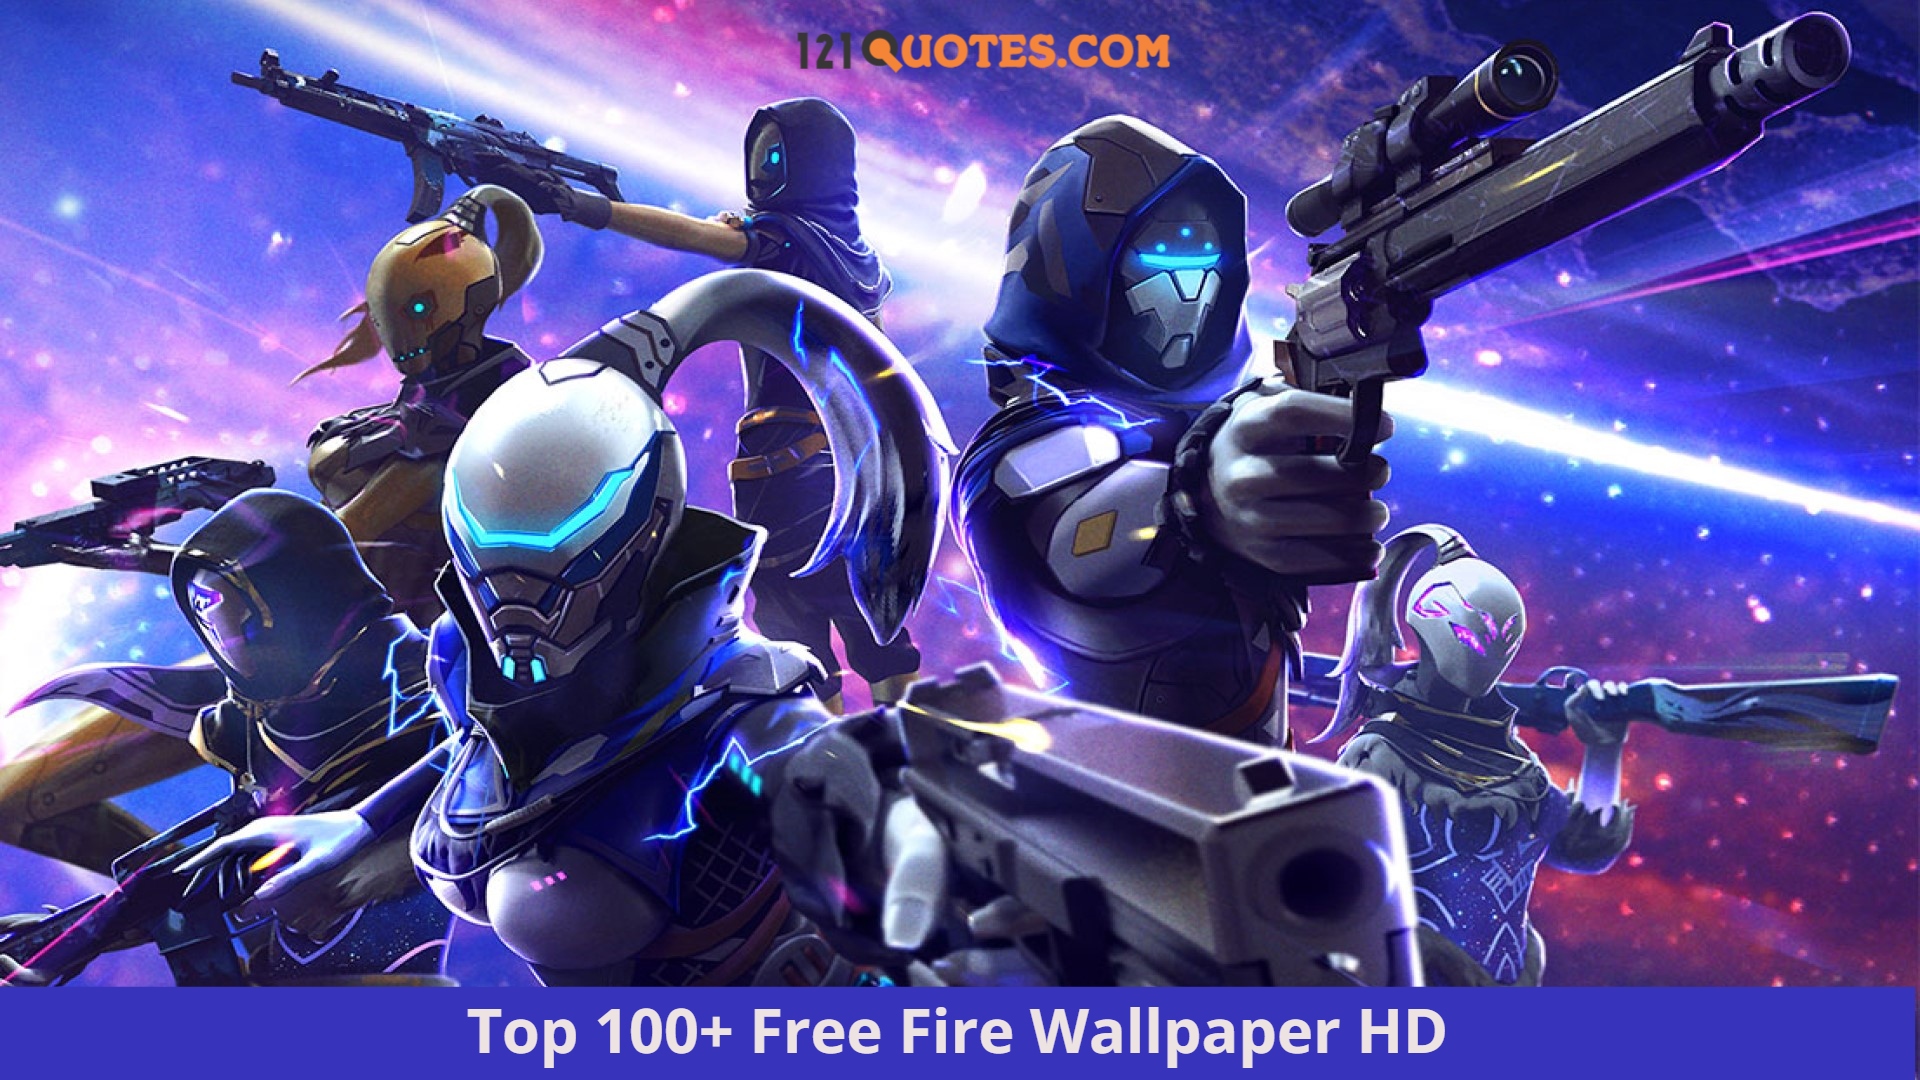 Free Fire Wallpaper HD, 4k, 3d for Android, Iphone